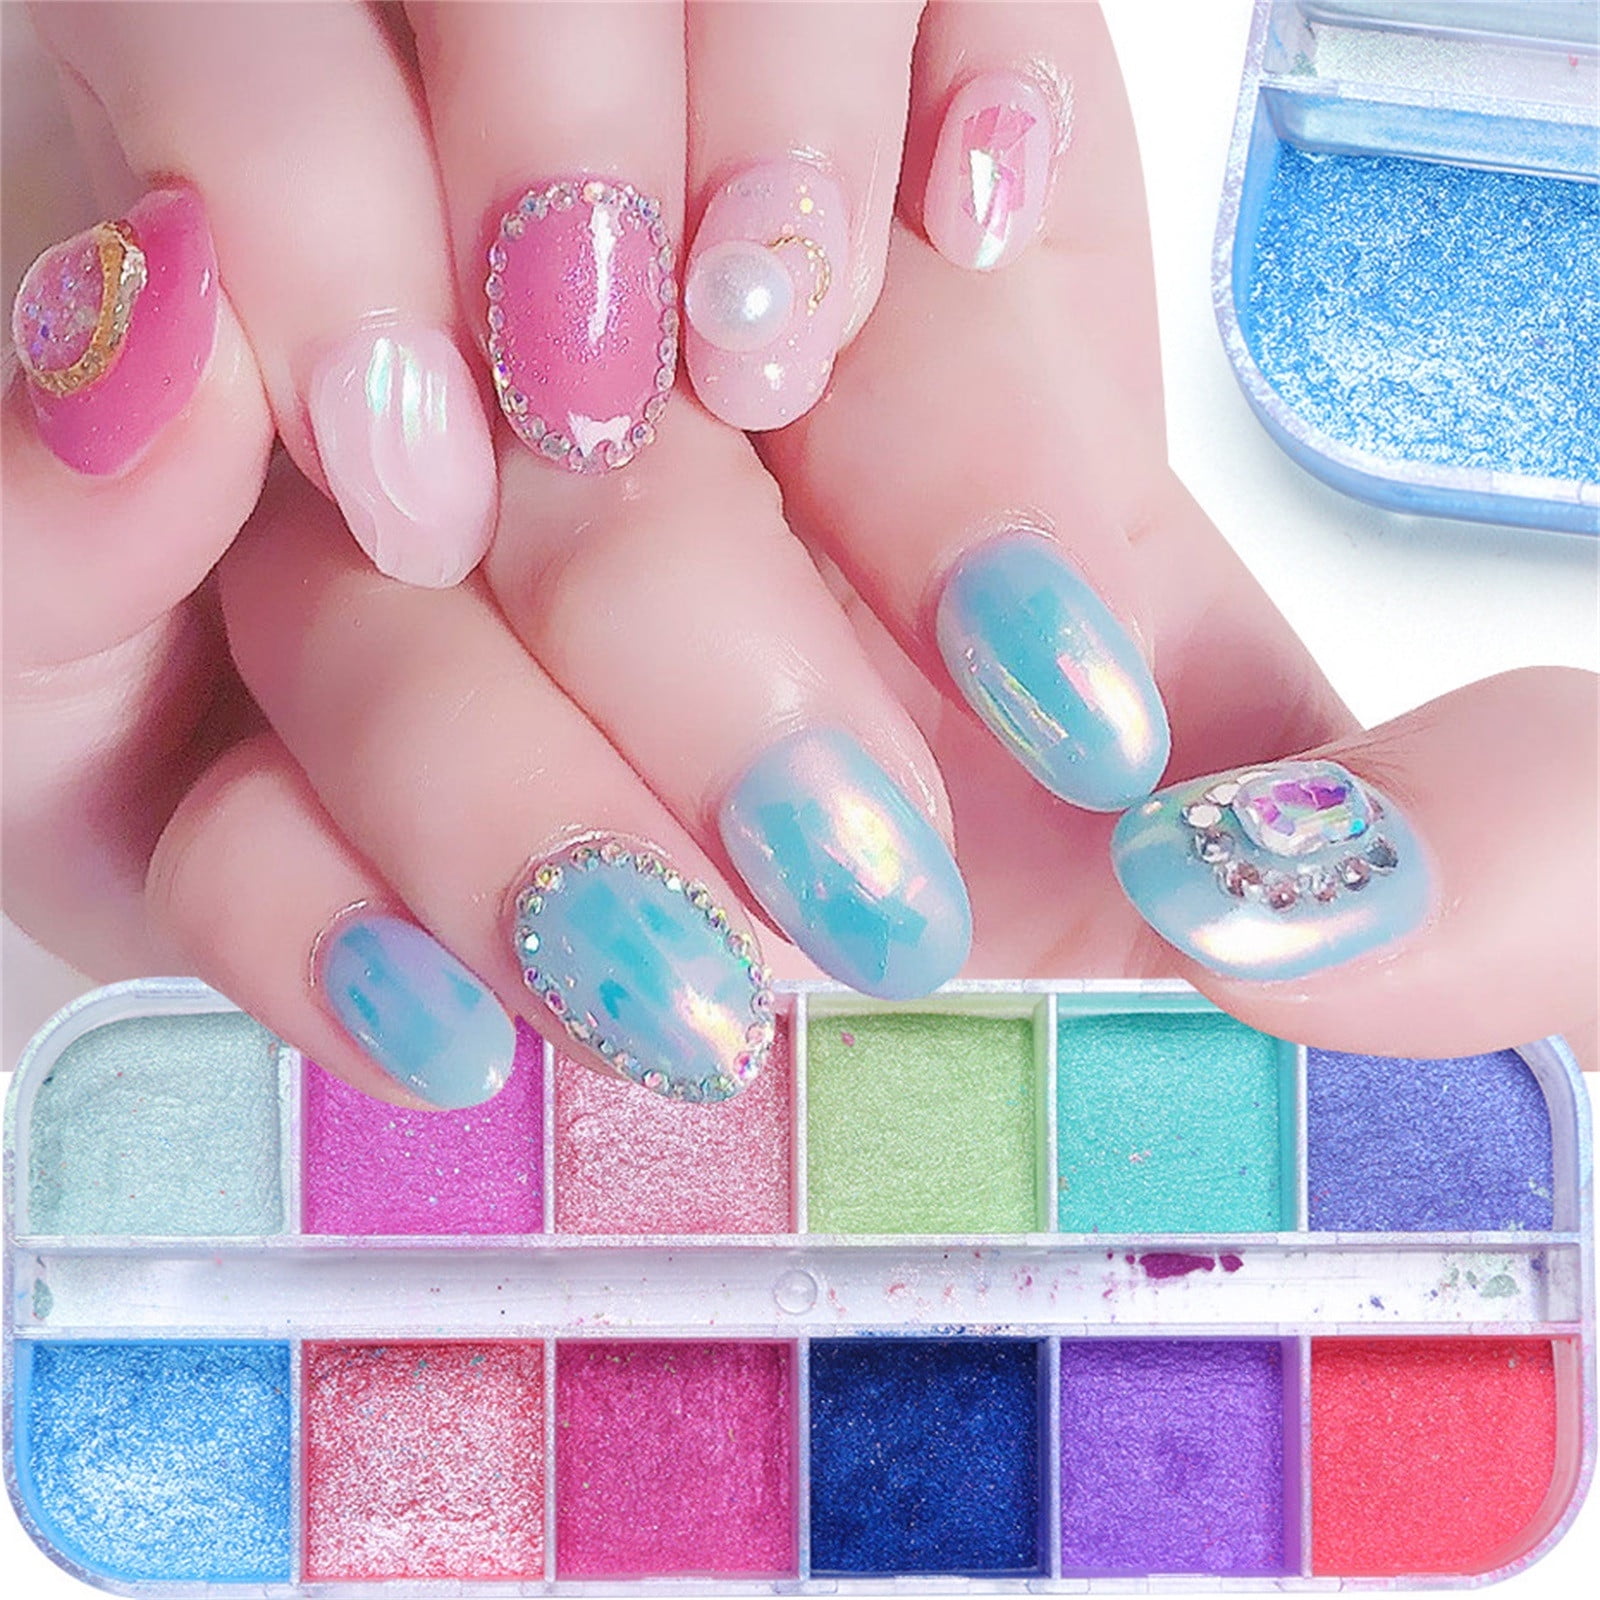 10g/Bag Shining Sugar Nail Glitter Transparent White Coating Effect Powder  Colorful Dust For Nail Art Decorations Accessories